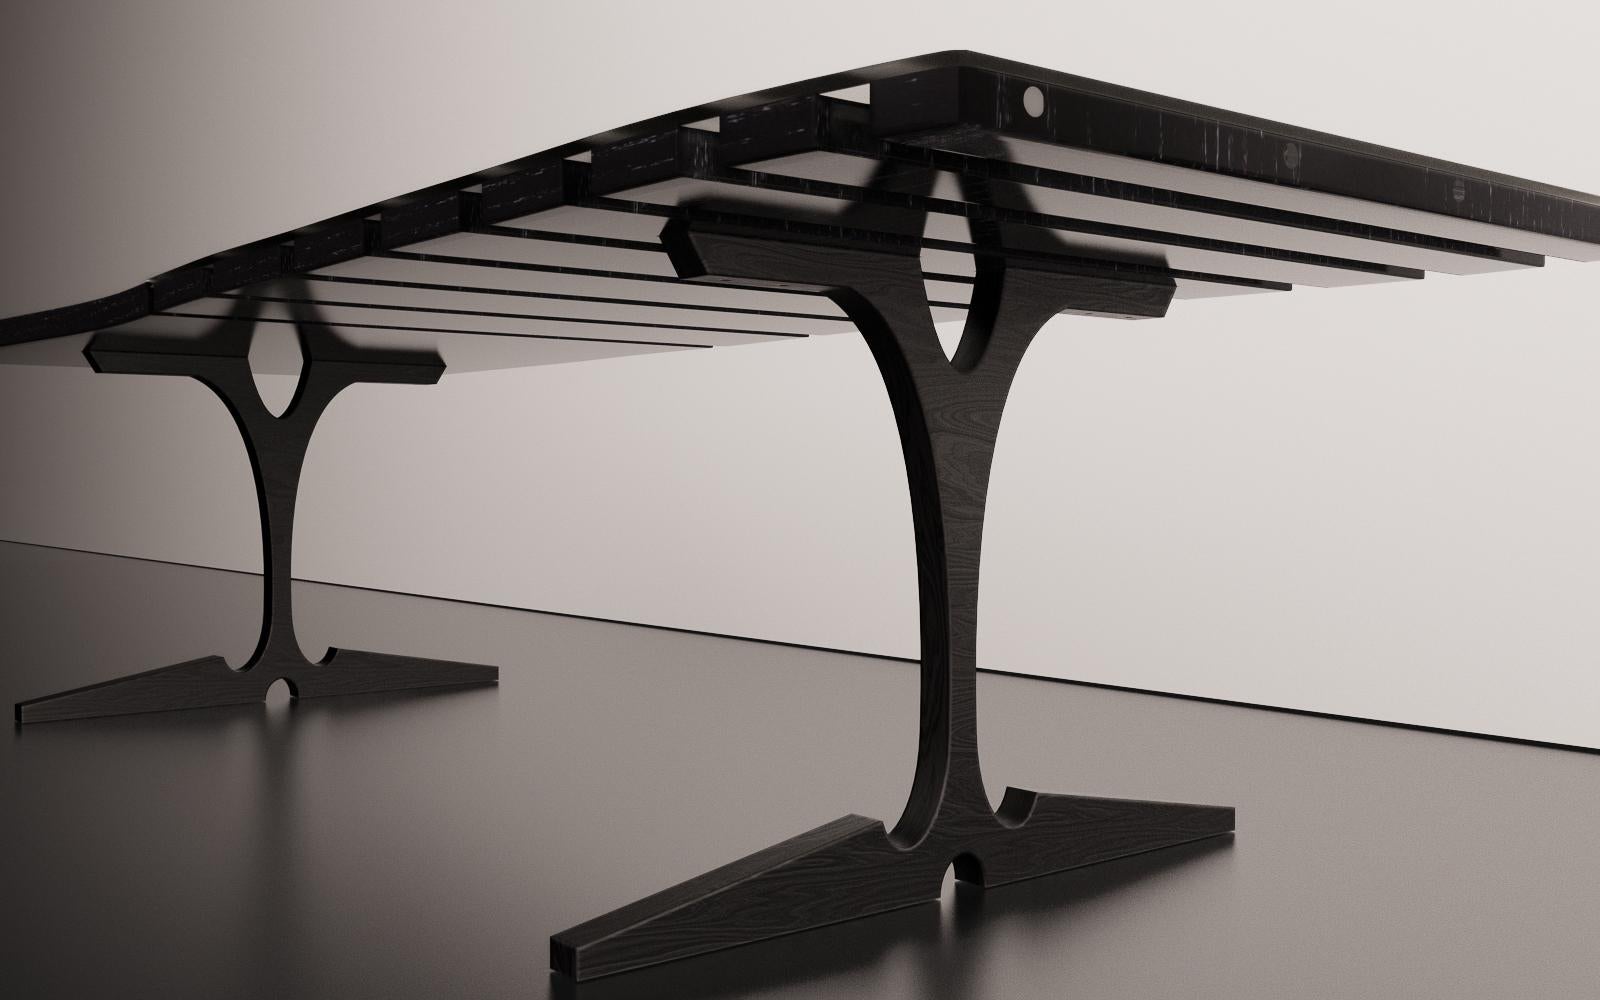 The Garni dining table by Christopher Mark is a hand crafted one of one piece. Christopher was inspired by the rock formation at Garni Gorge in Yerevan, Armenia. The top of the dining table is made of a single slab that has been divided into